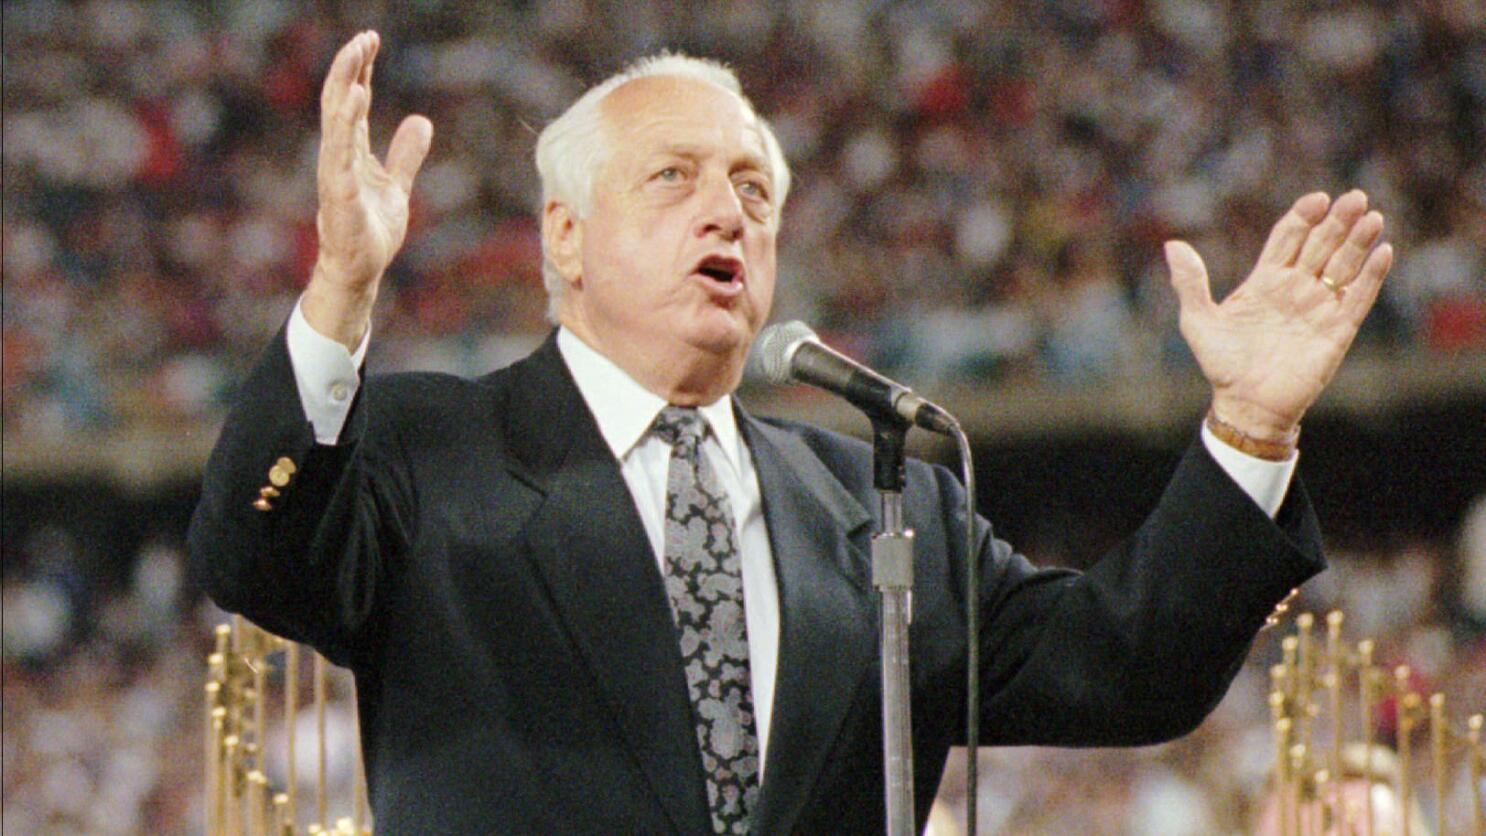 The late Tommy Lasorda visits Dodger Stadium for the last time - Memorial  at Dodger Stadium 